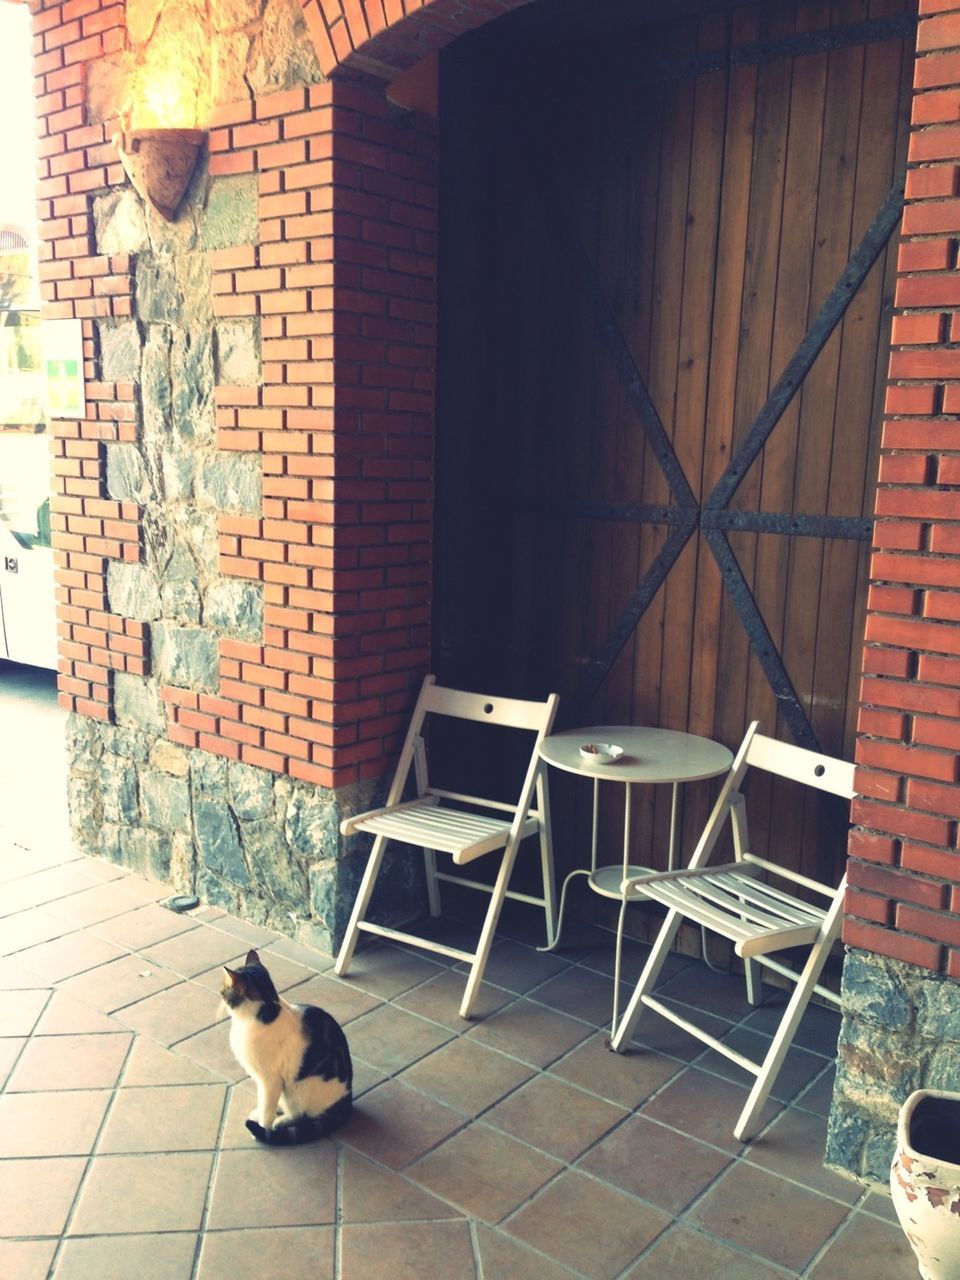 building exterior, architecture, built structure, chair, tiled floor, domestic animals, empty, pets, cobblestone, table, brick wall, animal themes, absence, house, paving stone, sidewalk, mammal, no people, wall - building feature, sunlight